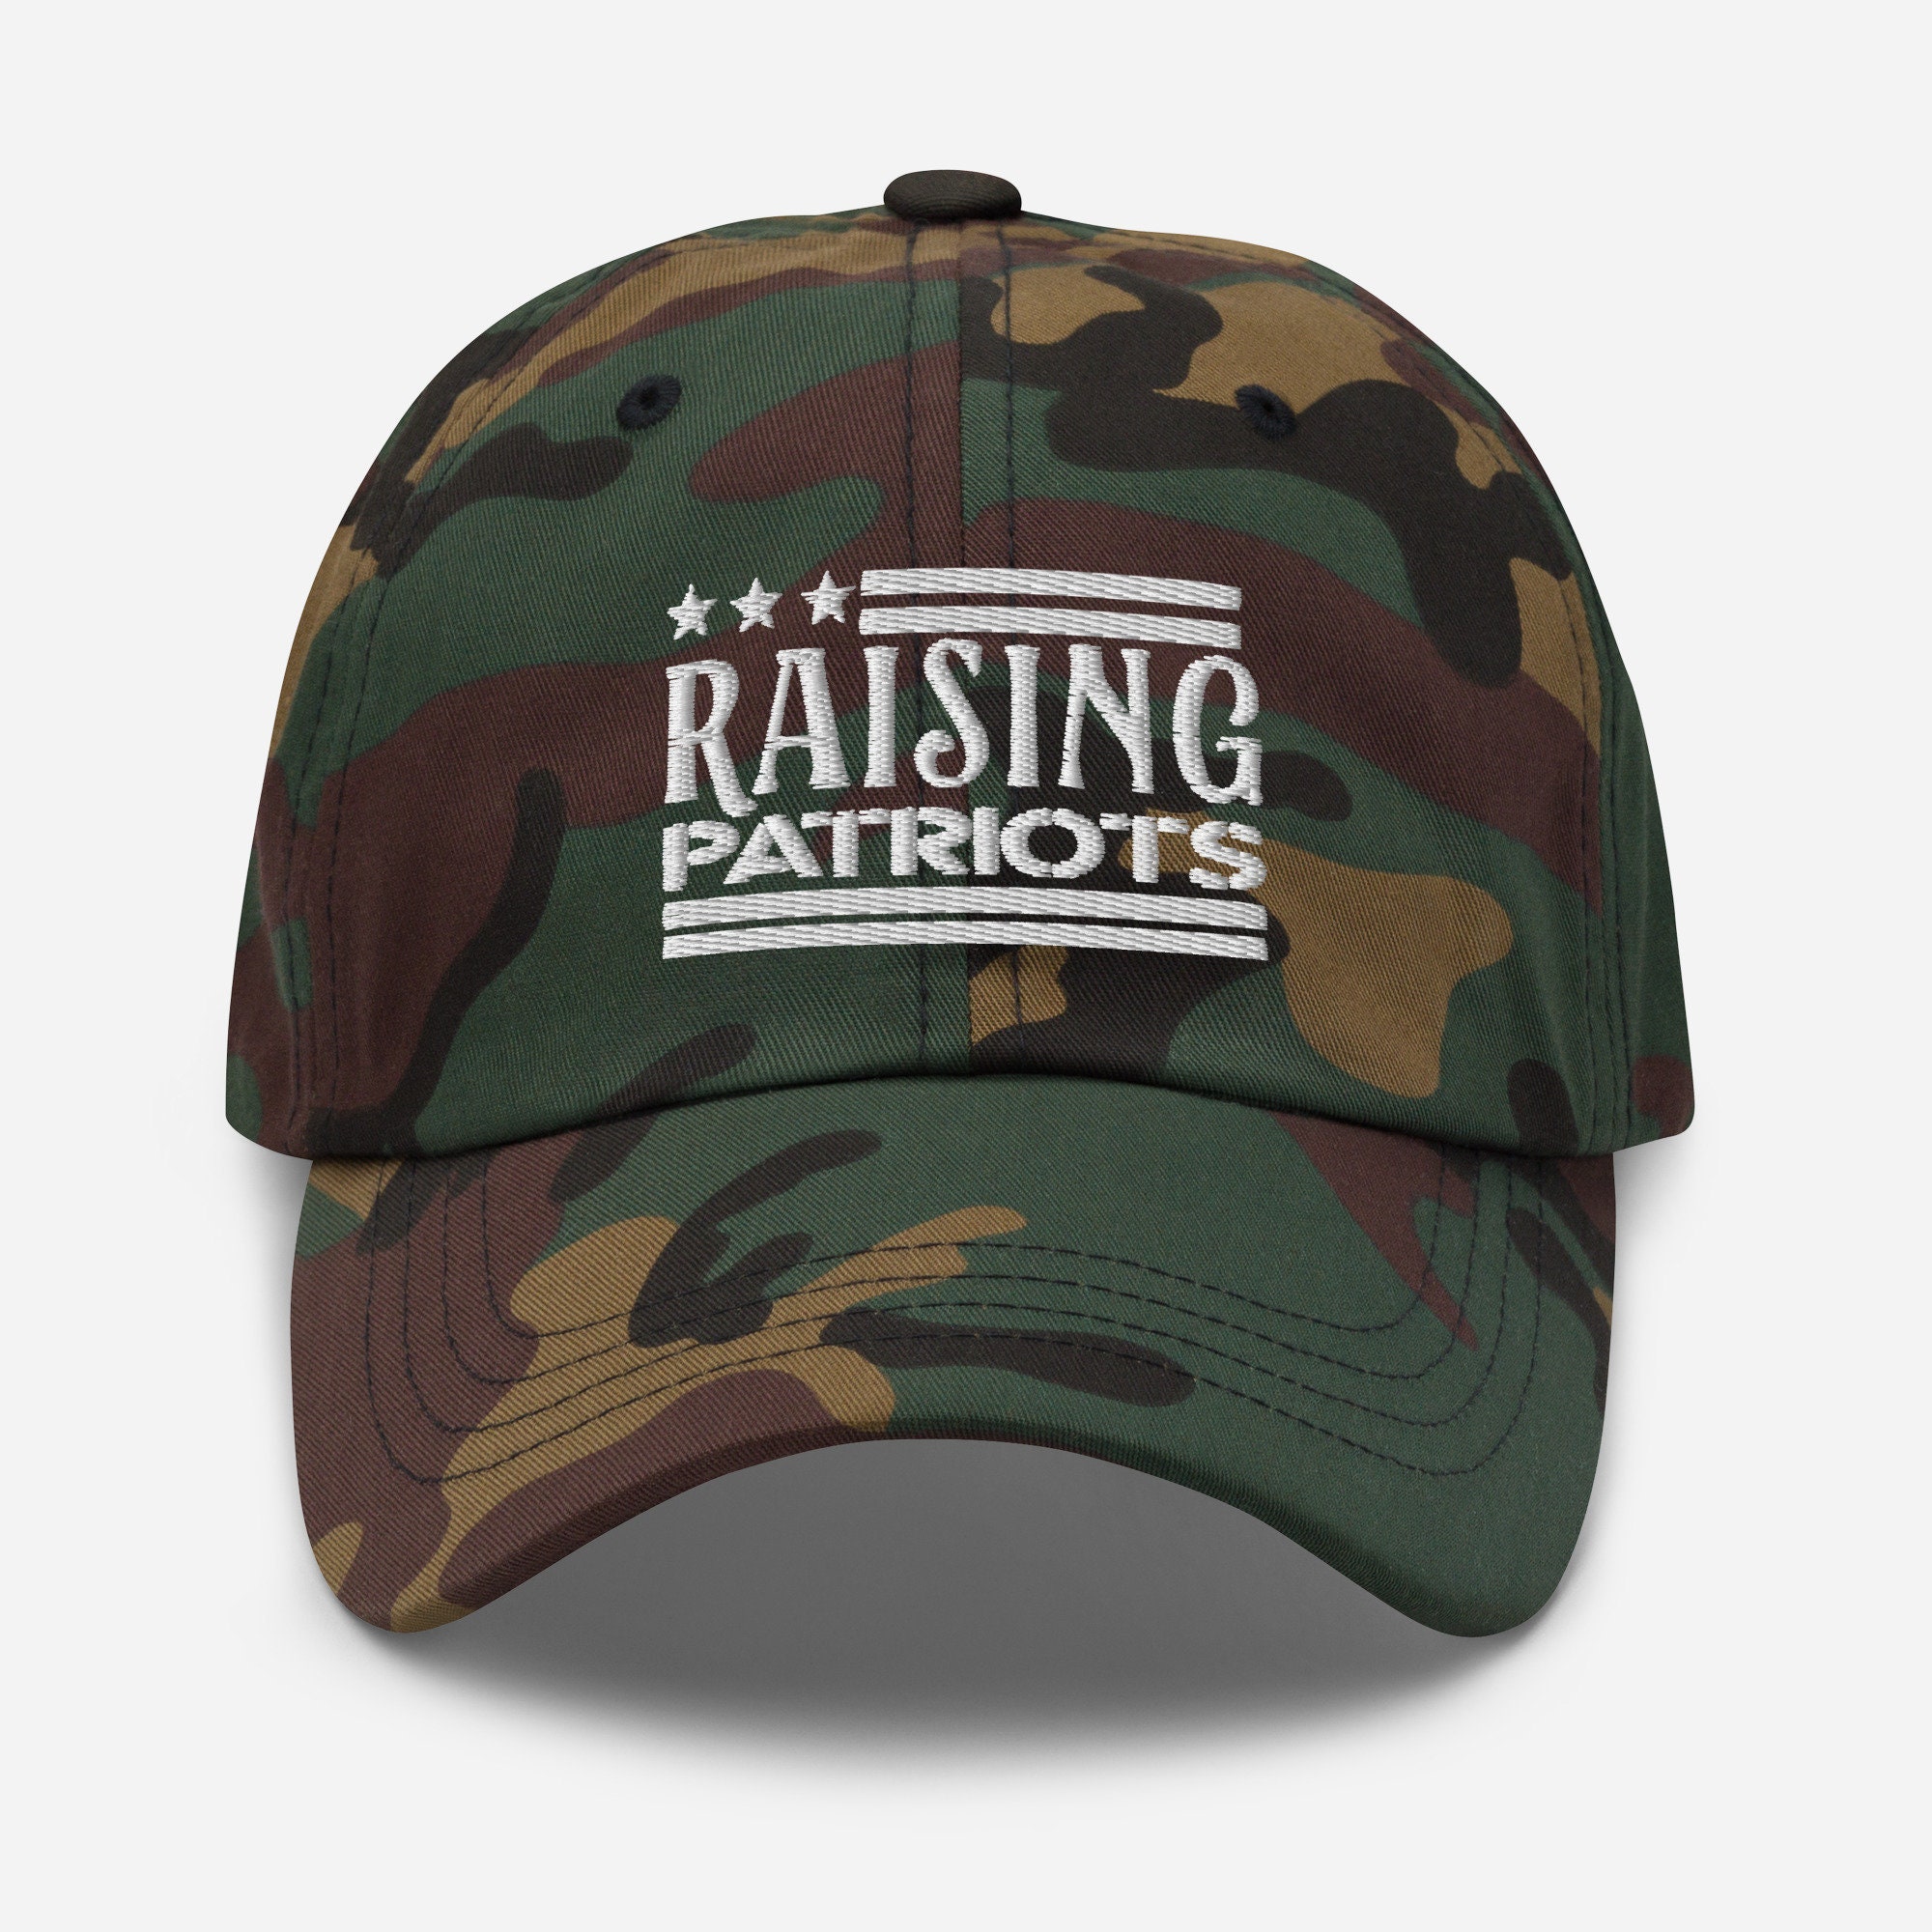 Raising Patriots Father's Day Embroidered Hat